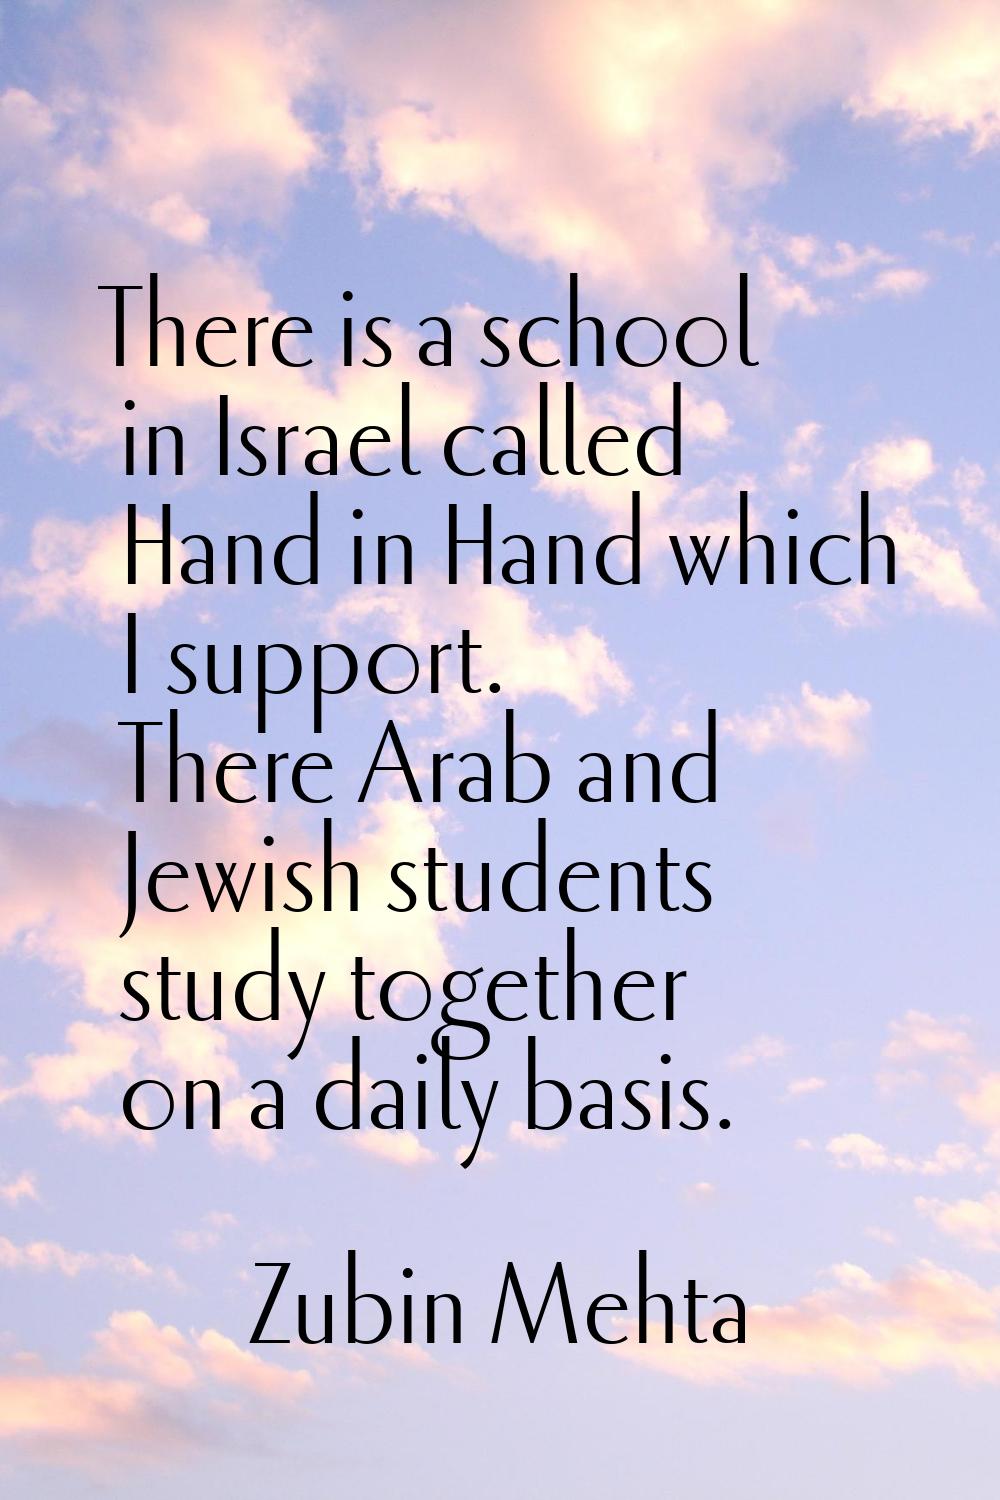 There is a school in Israel called Hand in Hand which I support. There Arab and Jewish students stu